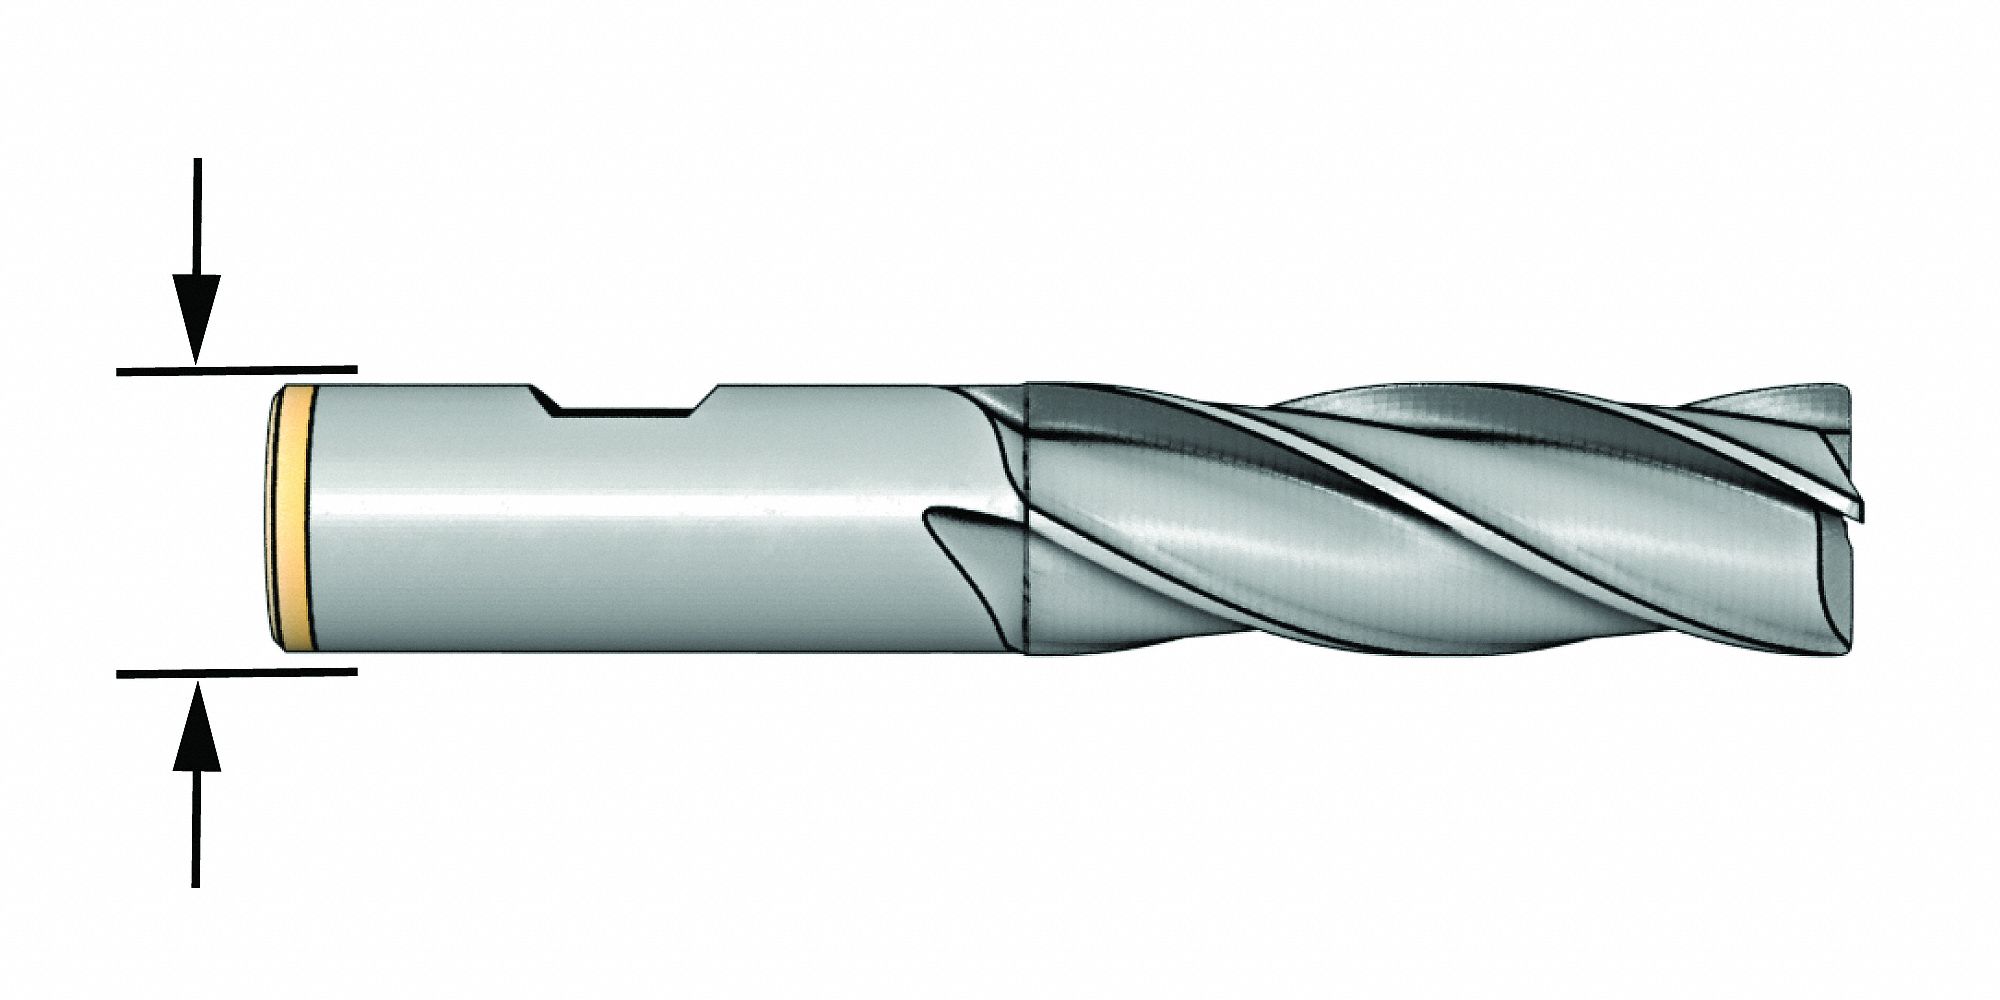 Micro 100 End Mill 12.00mm Milling Dia GEMM GEMM-120-4 Uncoated 26.00mm Length of Cut Number of Flutes: 4 